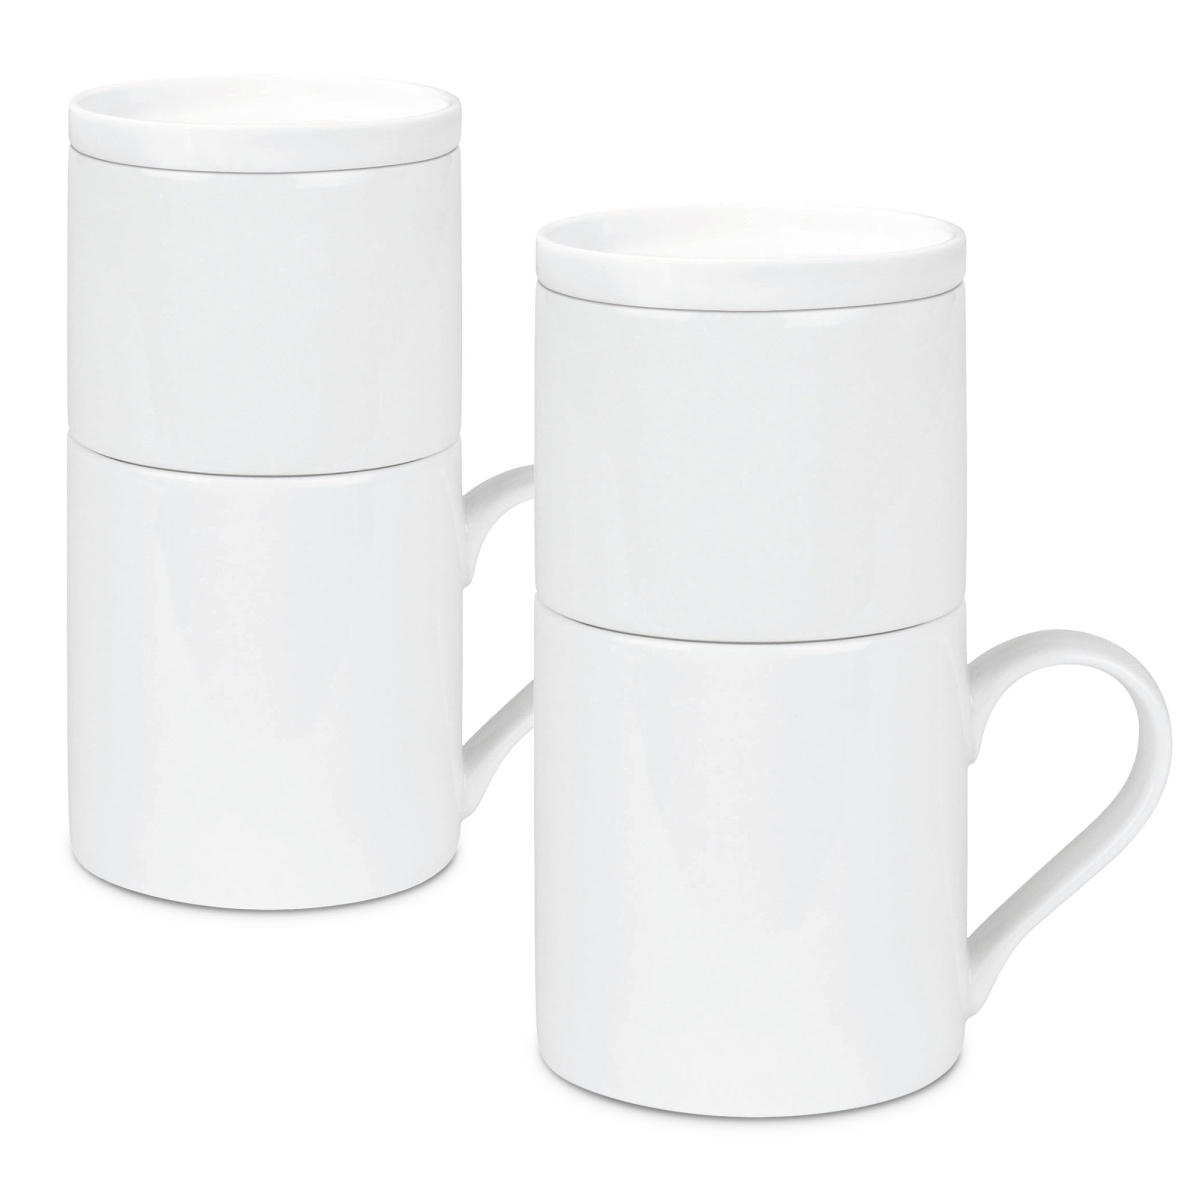 42 5 618 0000 Coffee For One Mugs -set Of 2